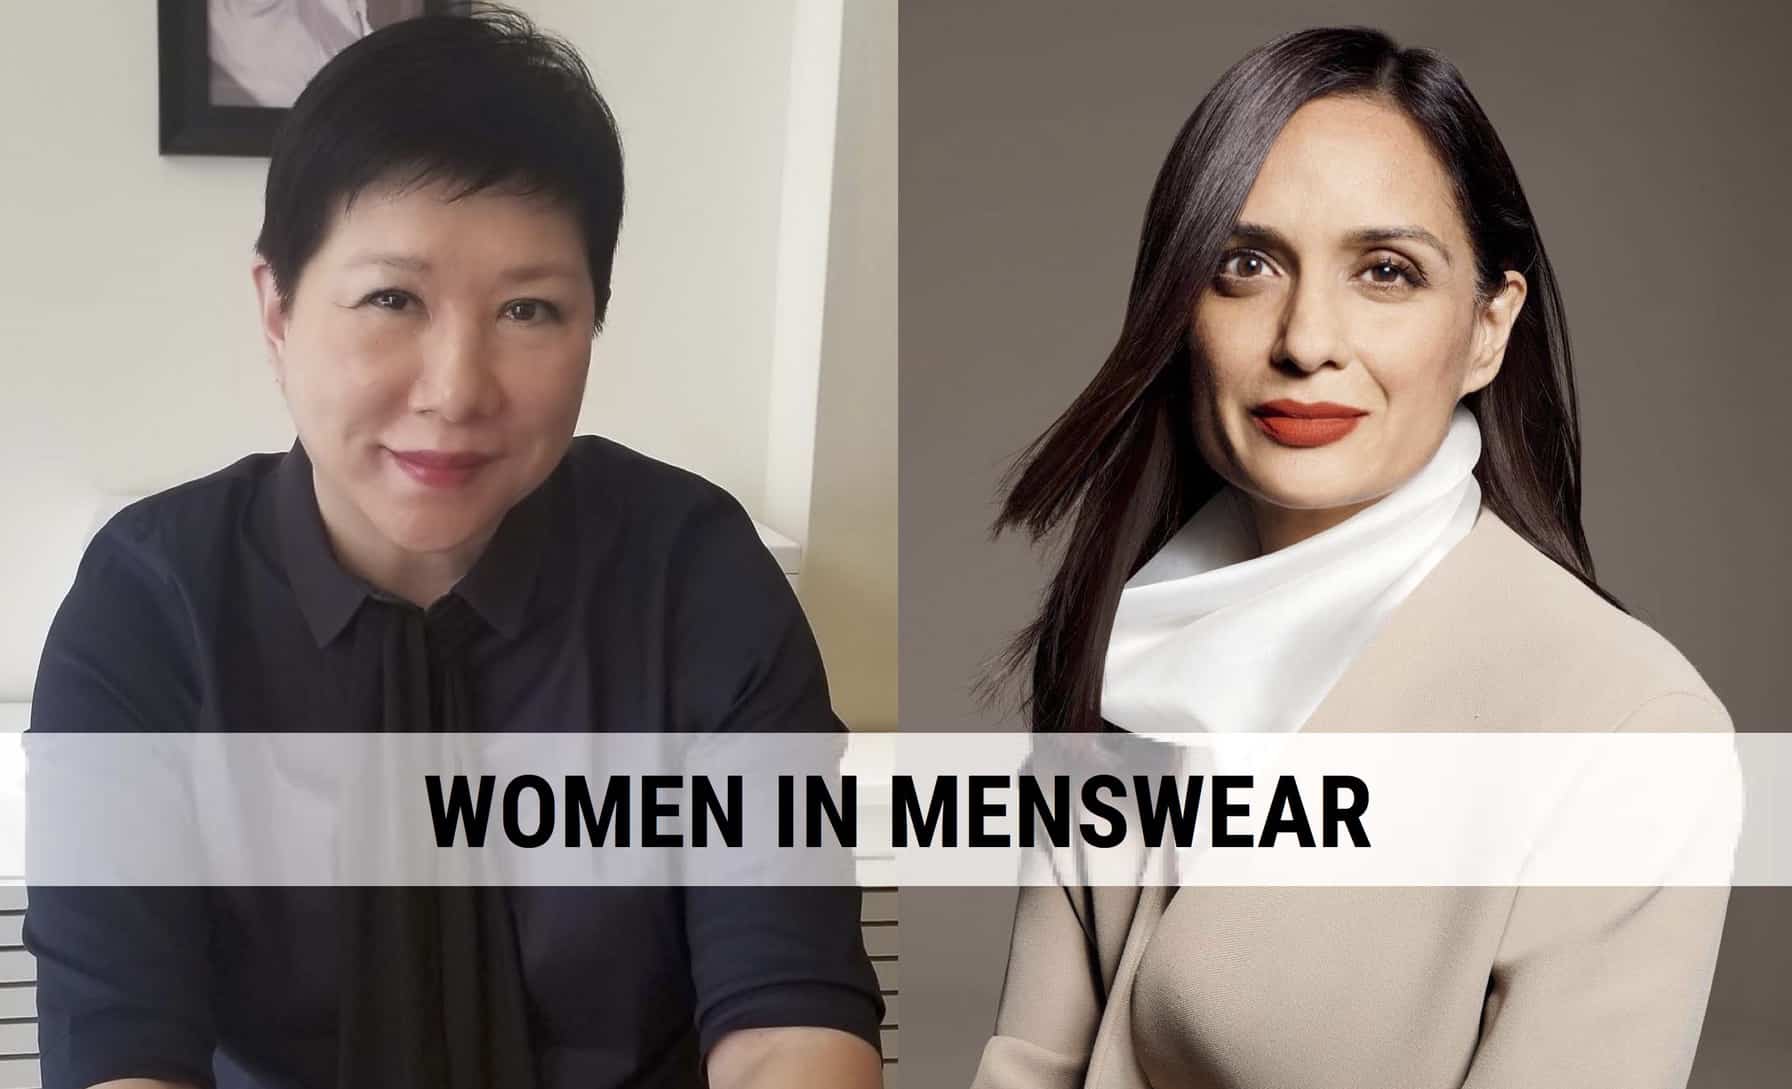 Katy Liu of Blackdog Showroom and Roopal Patel of SAKS FIFTH AVENUE are just two of the 12 women that MR Magazine has honored during Women's History Month.